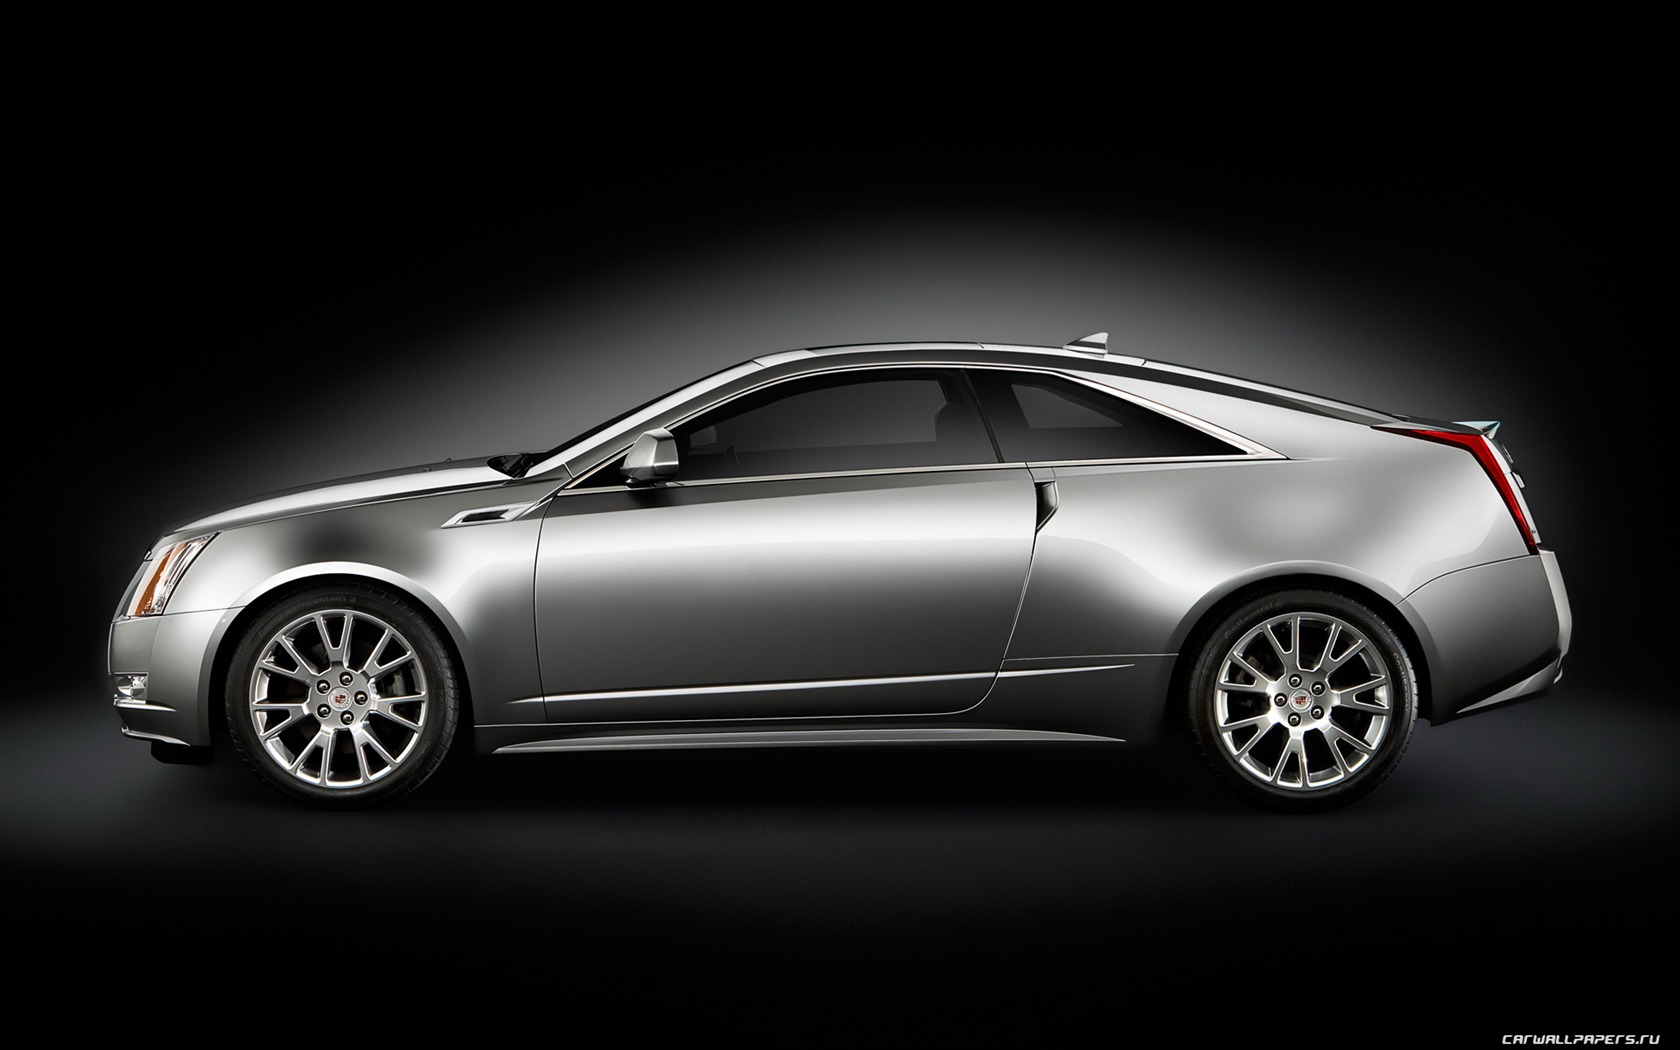 Cadillac CTS Coupe - 2011 凱迪拉克 #5 - 1680x1050